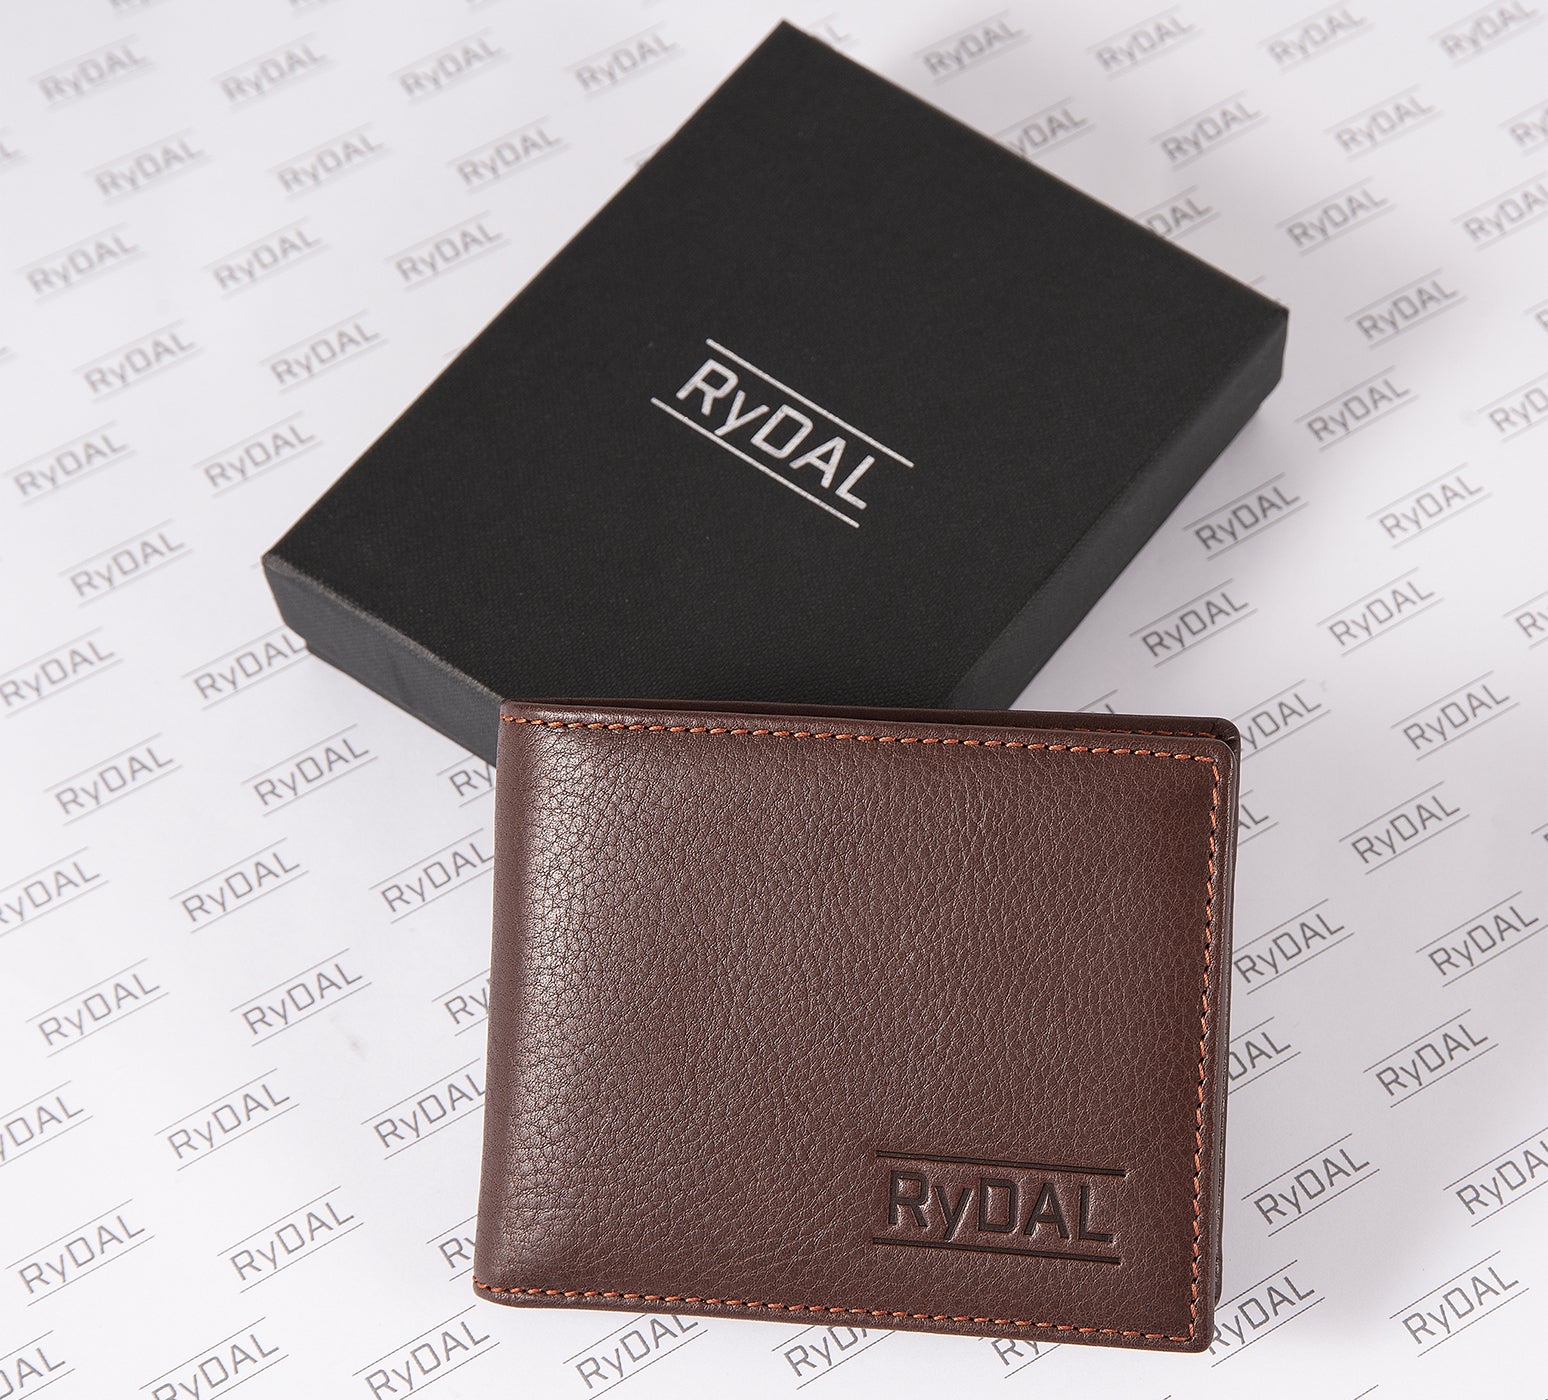 Mens Leather Wallet with Coin Pocket from Rydal in 'Dark Brown/Rust' with Giftbox.